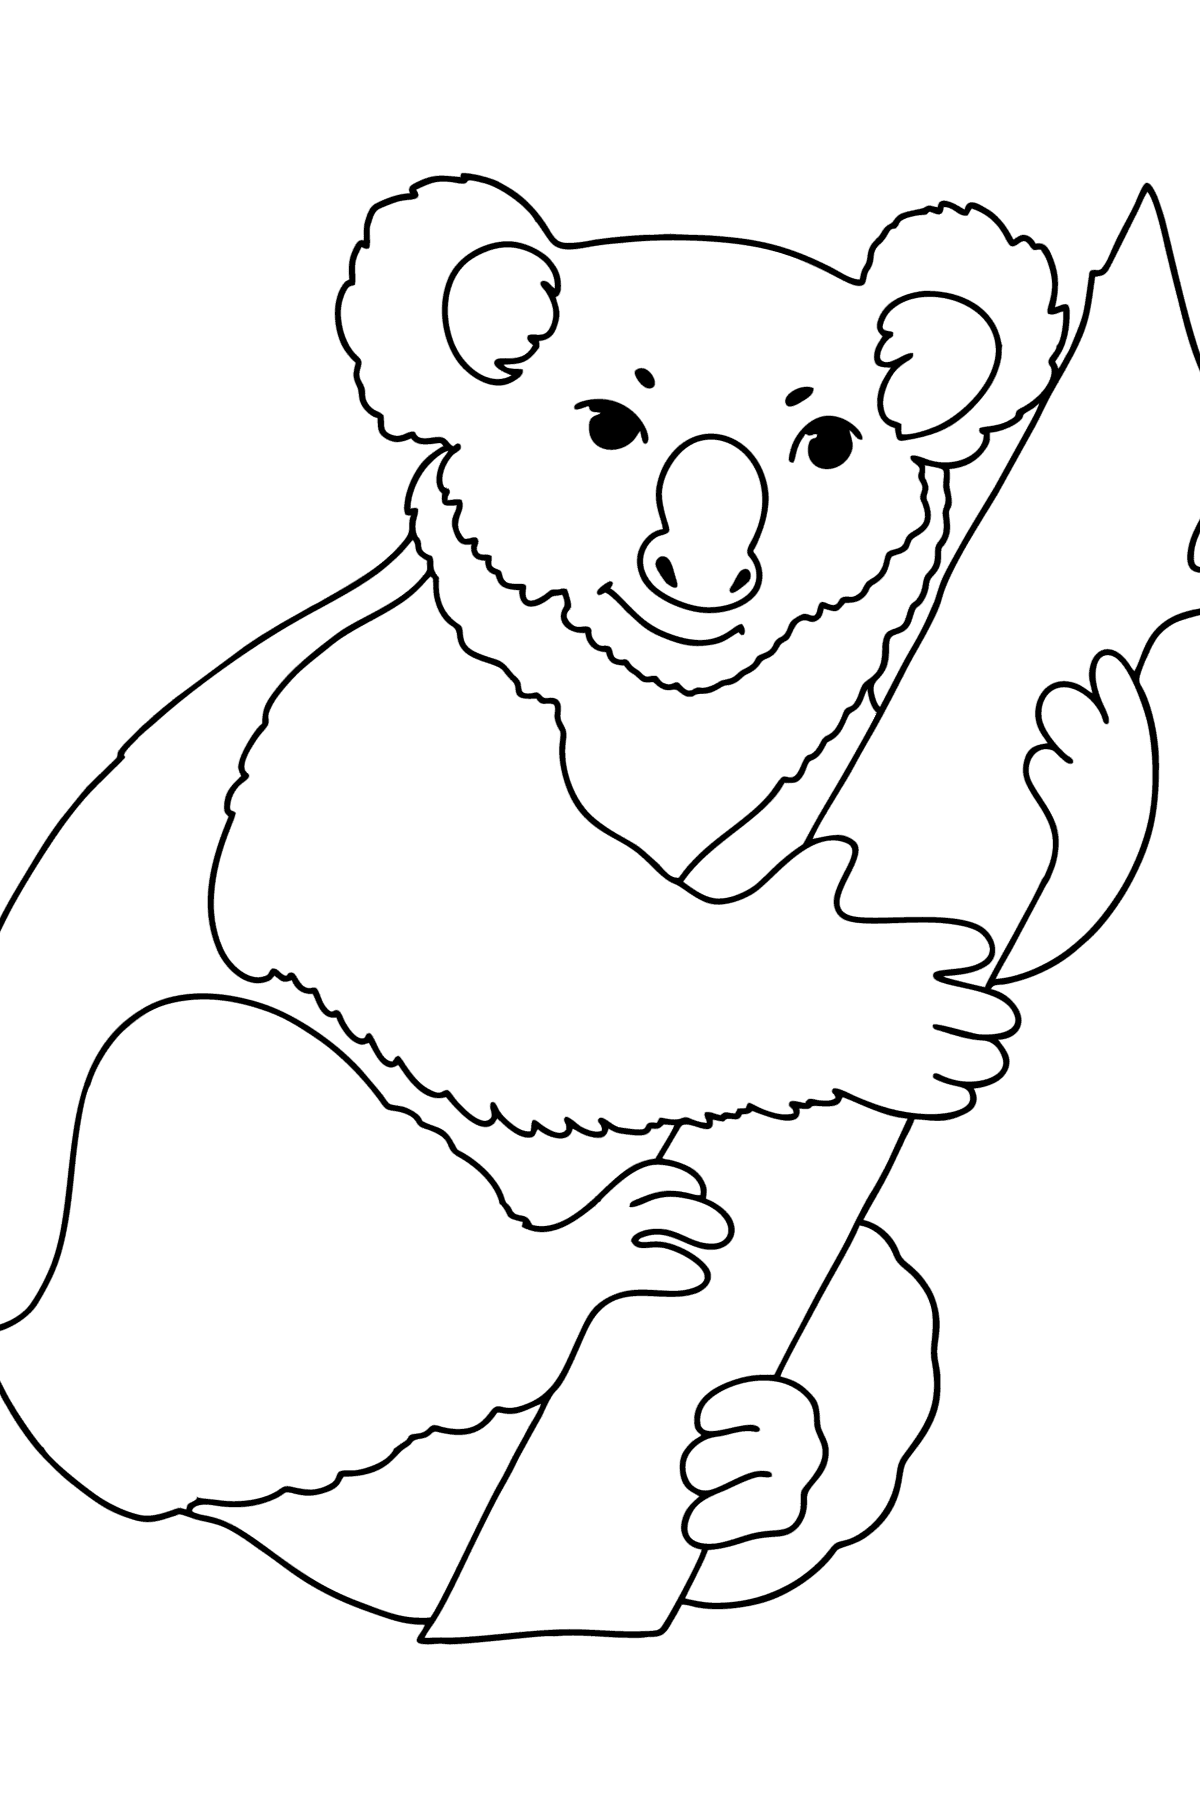 Koala Australia сoloring page - Coloring Pages for Kids